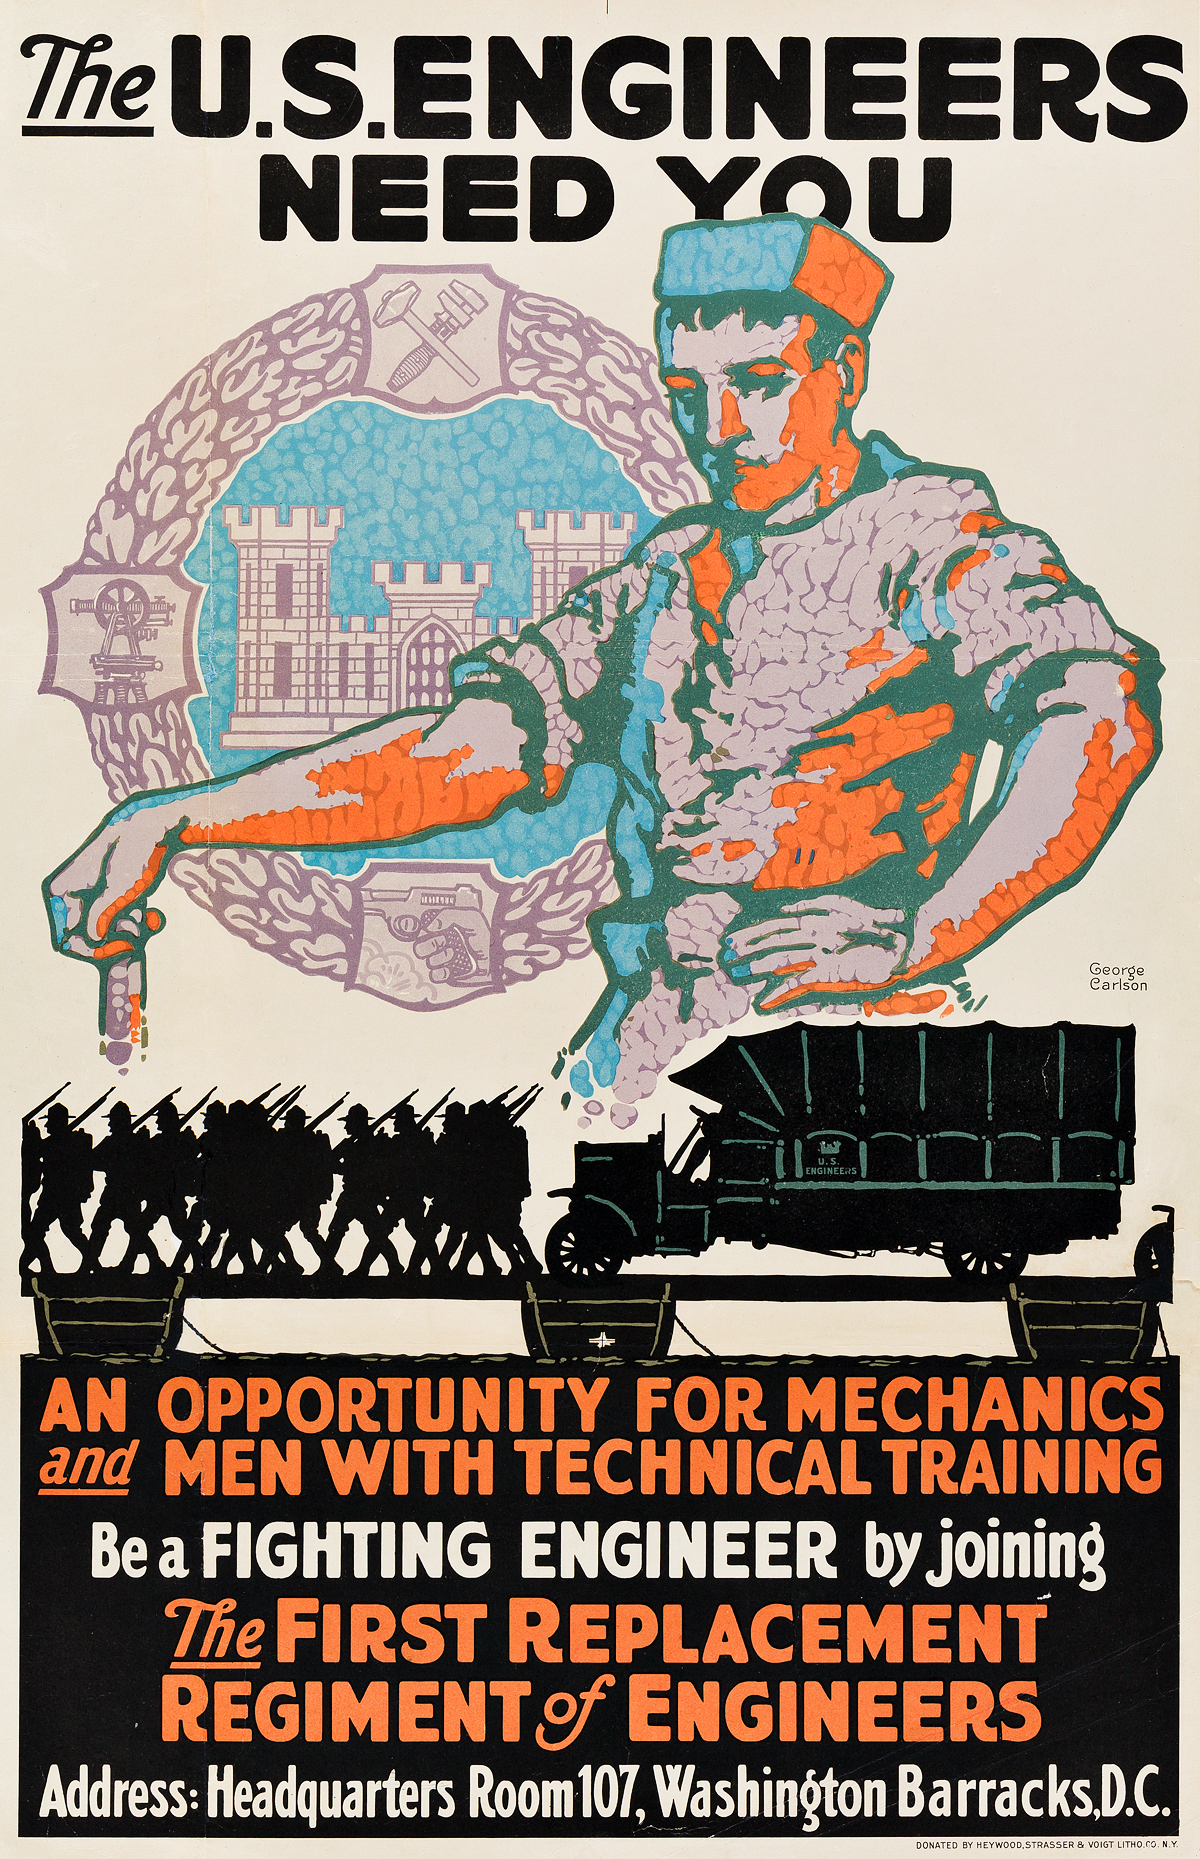 GEORGE CARLSON (DATES UNKNOWN). THE U.S. ENGINEERS NEED YOU. 1917. 28x18 inches, 73x47 cm. Heywood, Strasser & Voigt, New York.